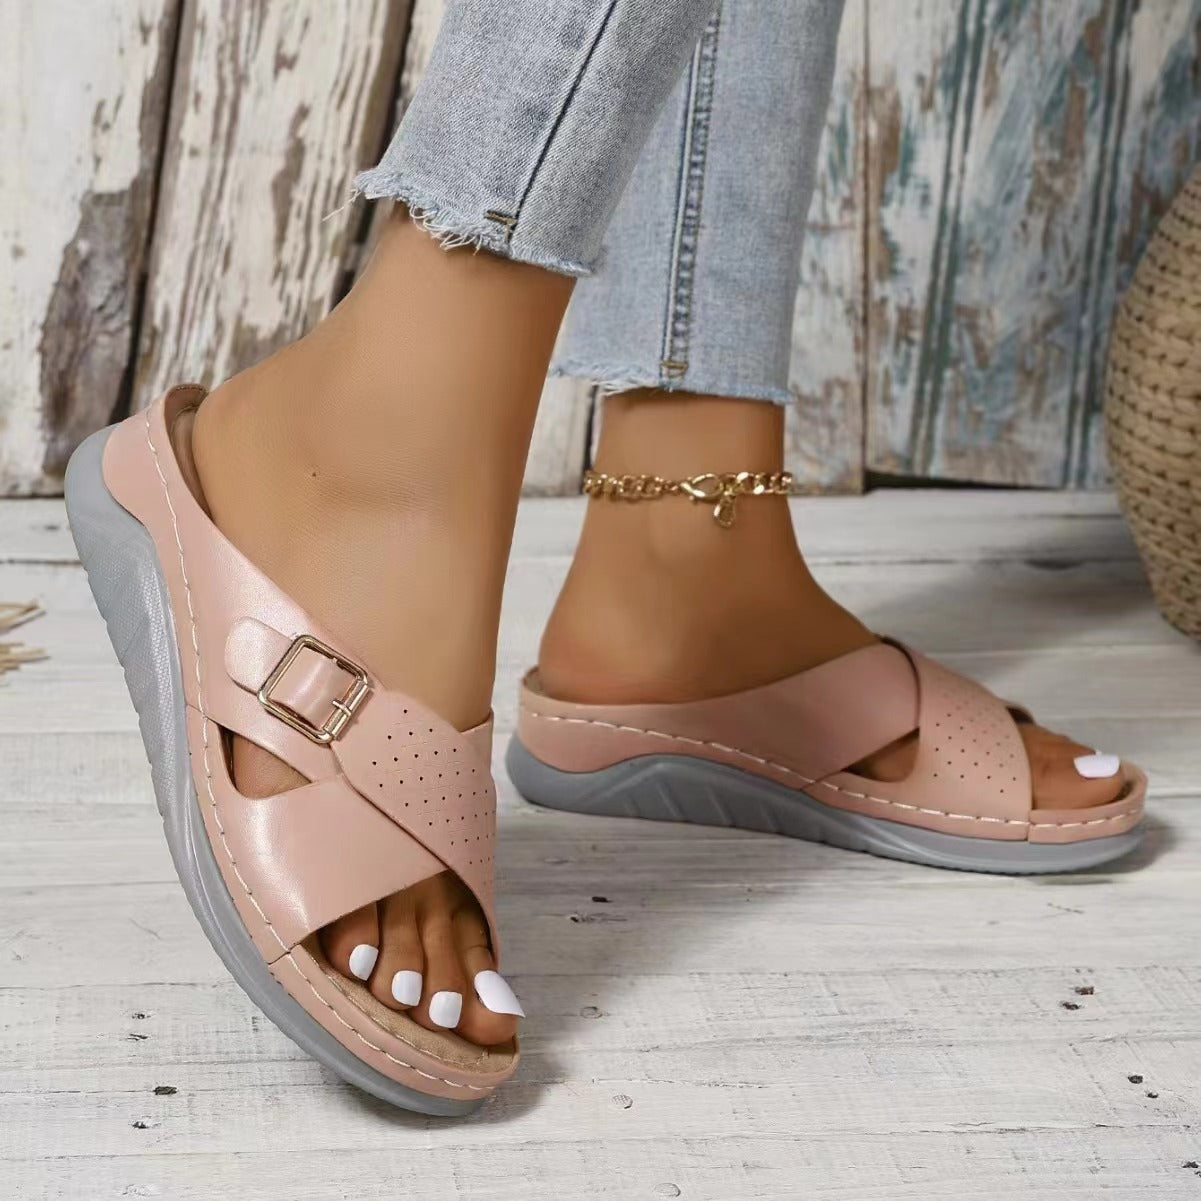 New Buckle Cross-design Slippers Summer Wedges Sandals Fashion Women's Beach Shoes